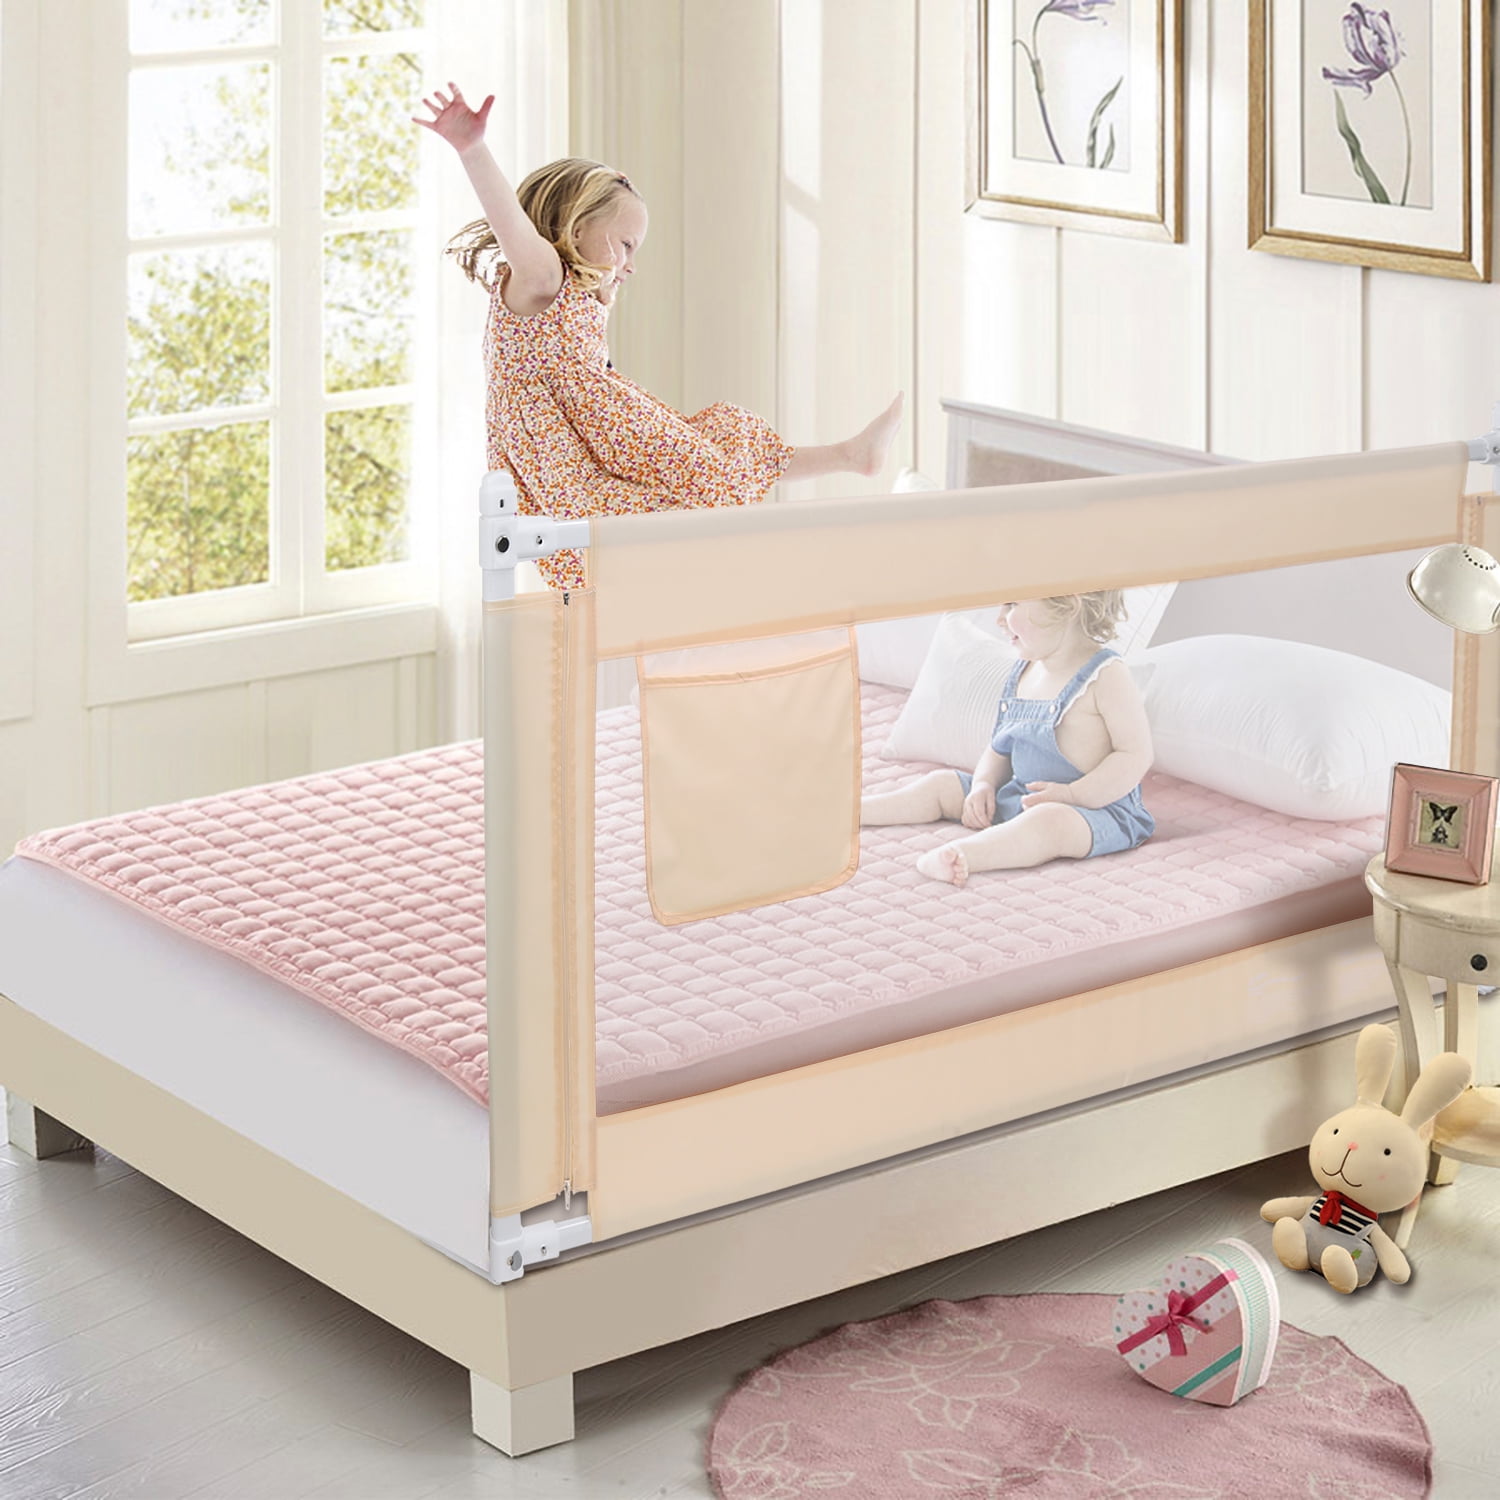 bed rails for king size bed